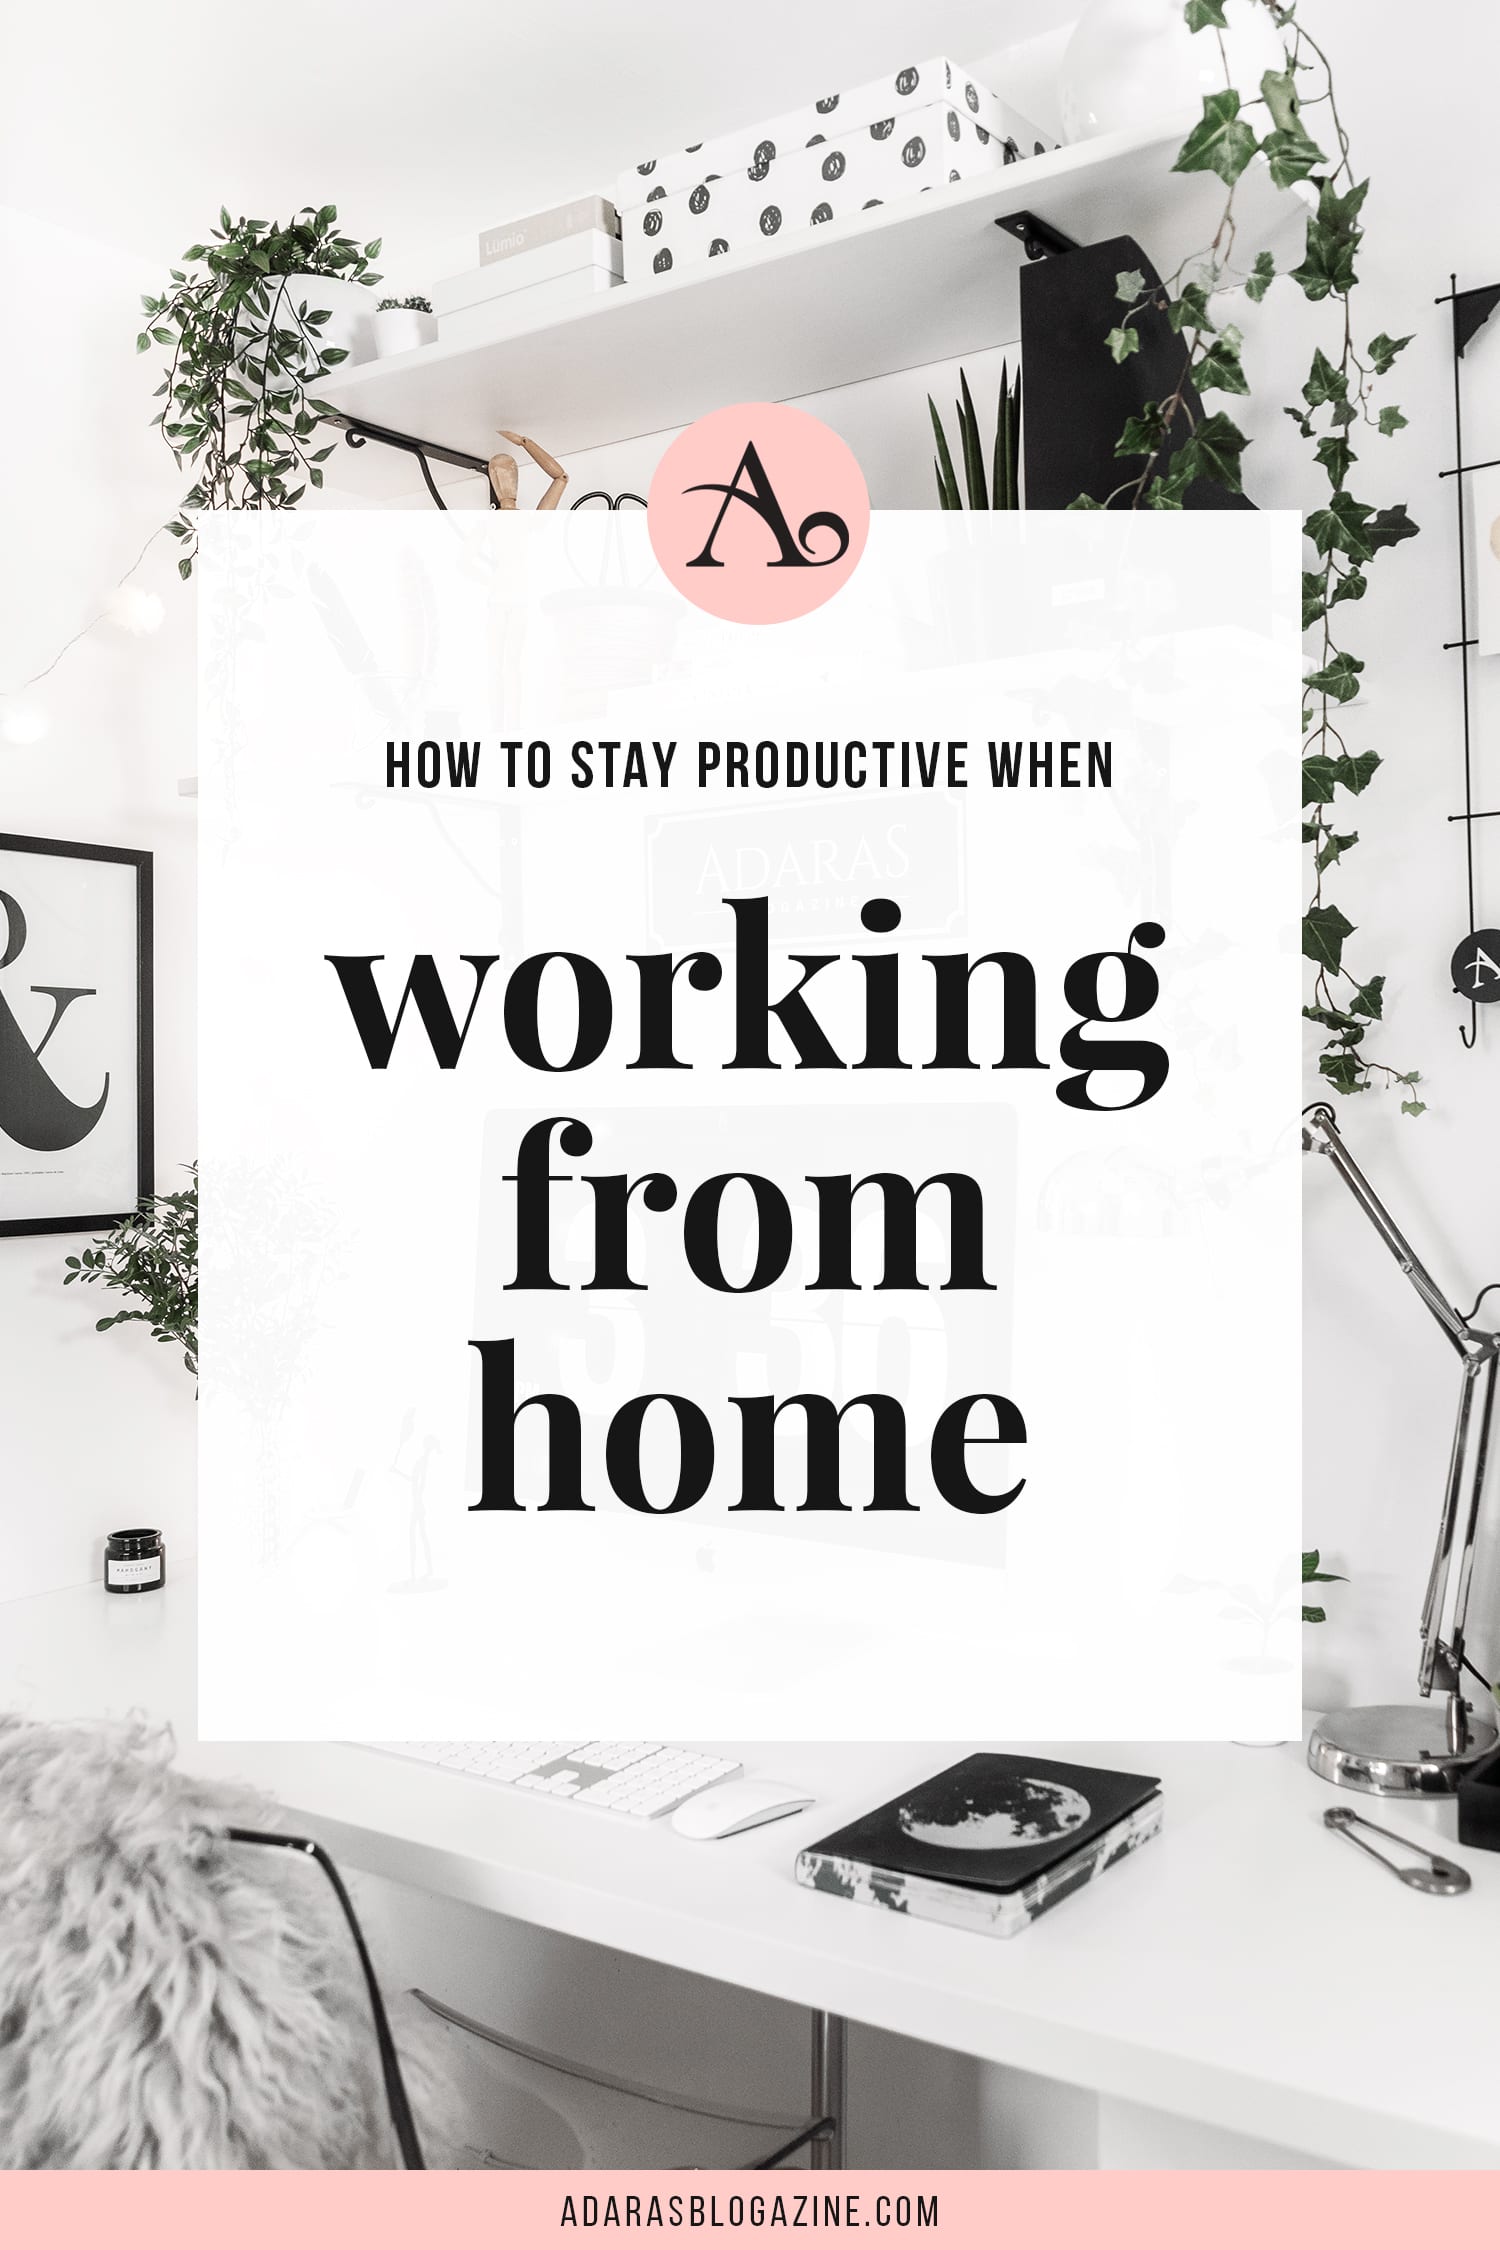 How to Stay Productive when Working Remotely